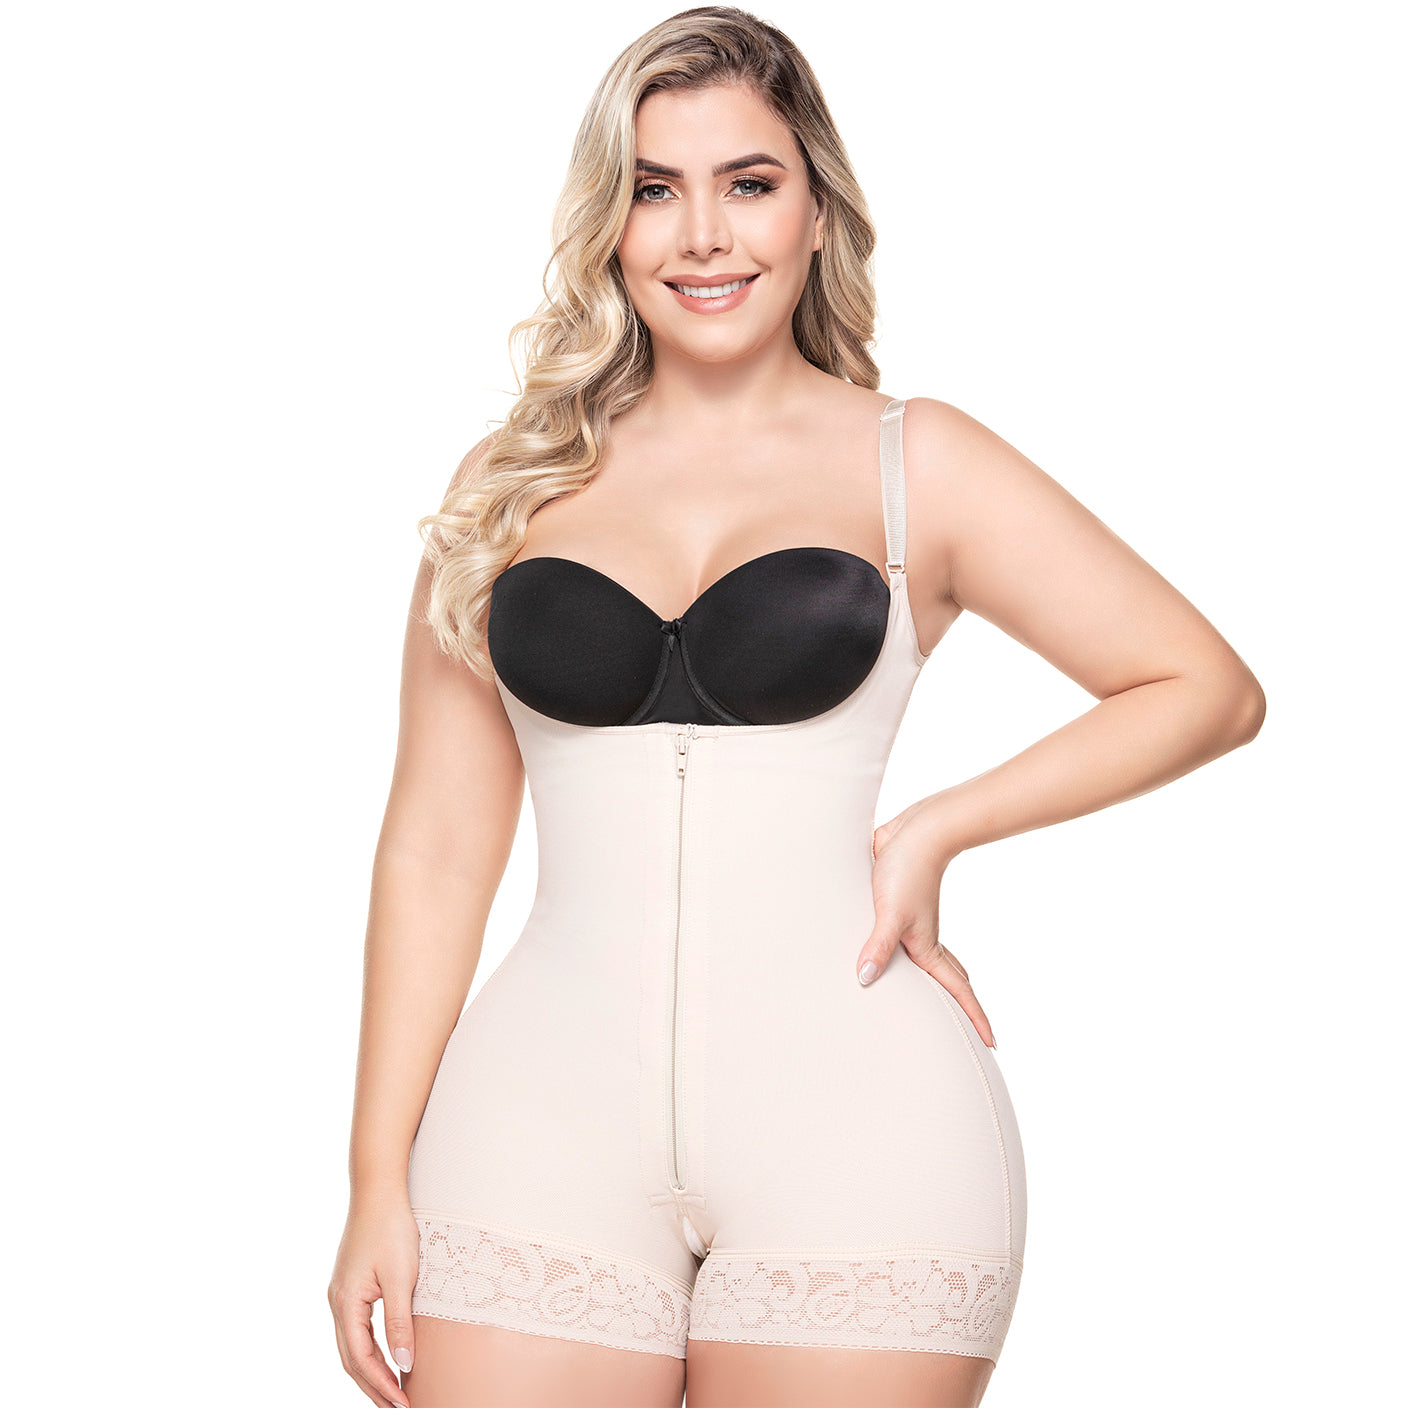 Postsurgical Compression Garment & Daily Use Open bust Butt lifting ef –  Shapes Secrets Fajas